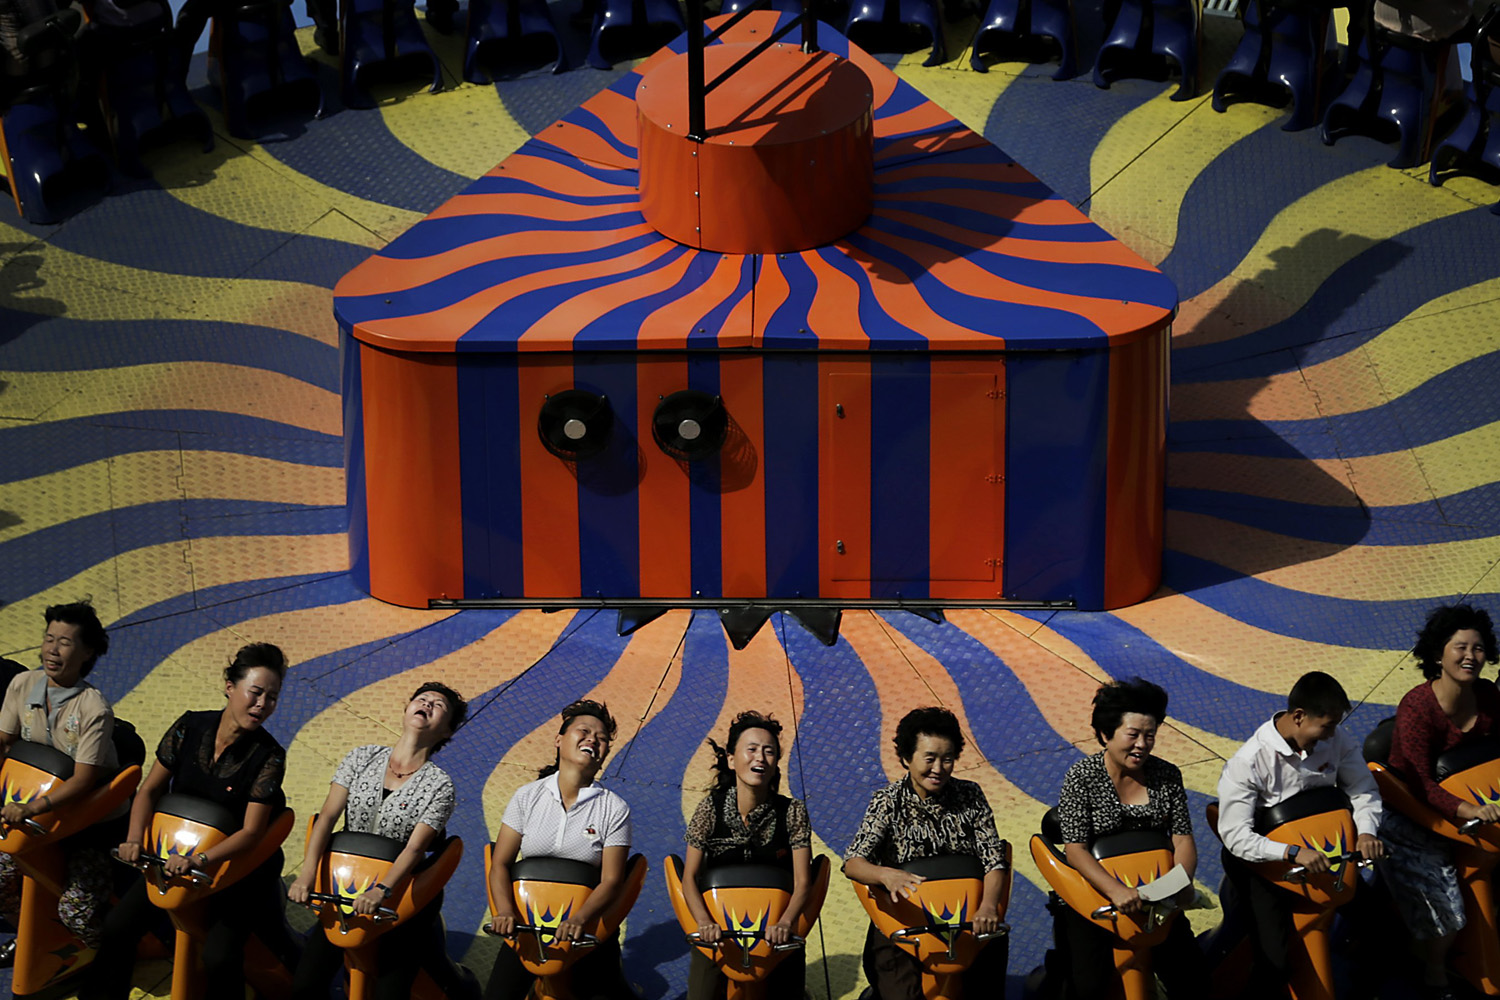 North Koreans enjoy a ride at the Kaeson Youth Amusement Park in Pyongyang on Sept. 3, 2014.